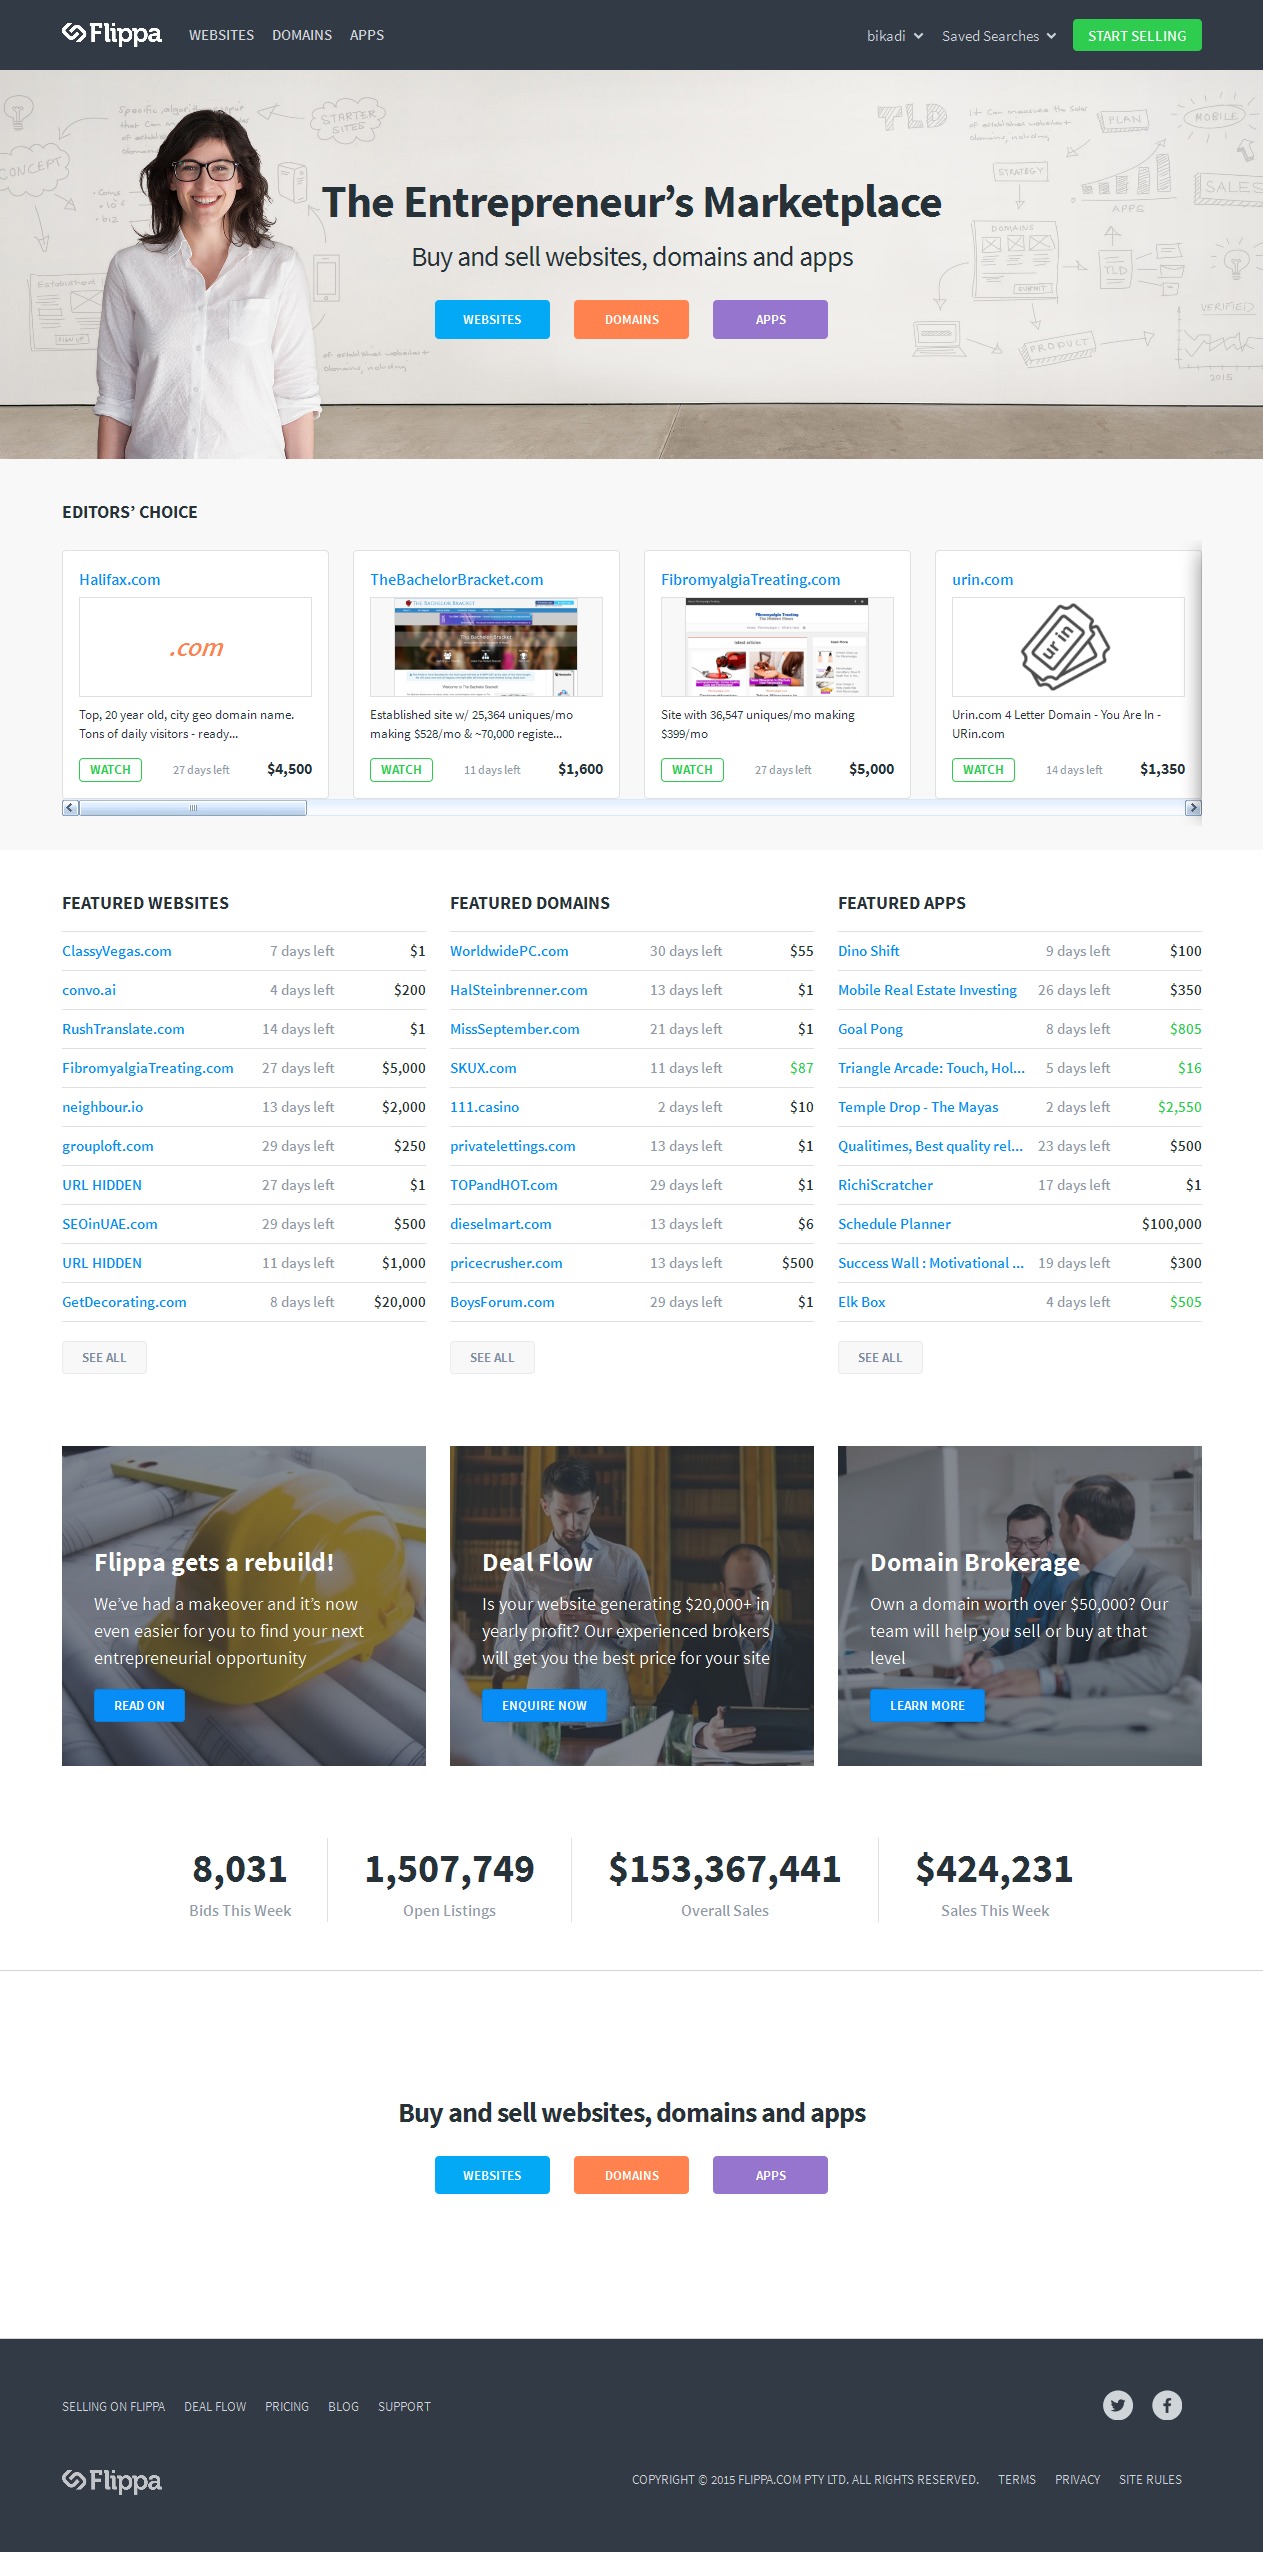 The redesigned Flippa homepage got a makeover